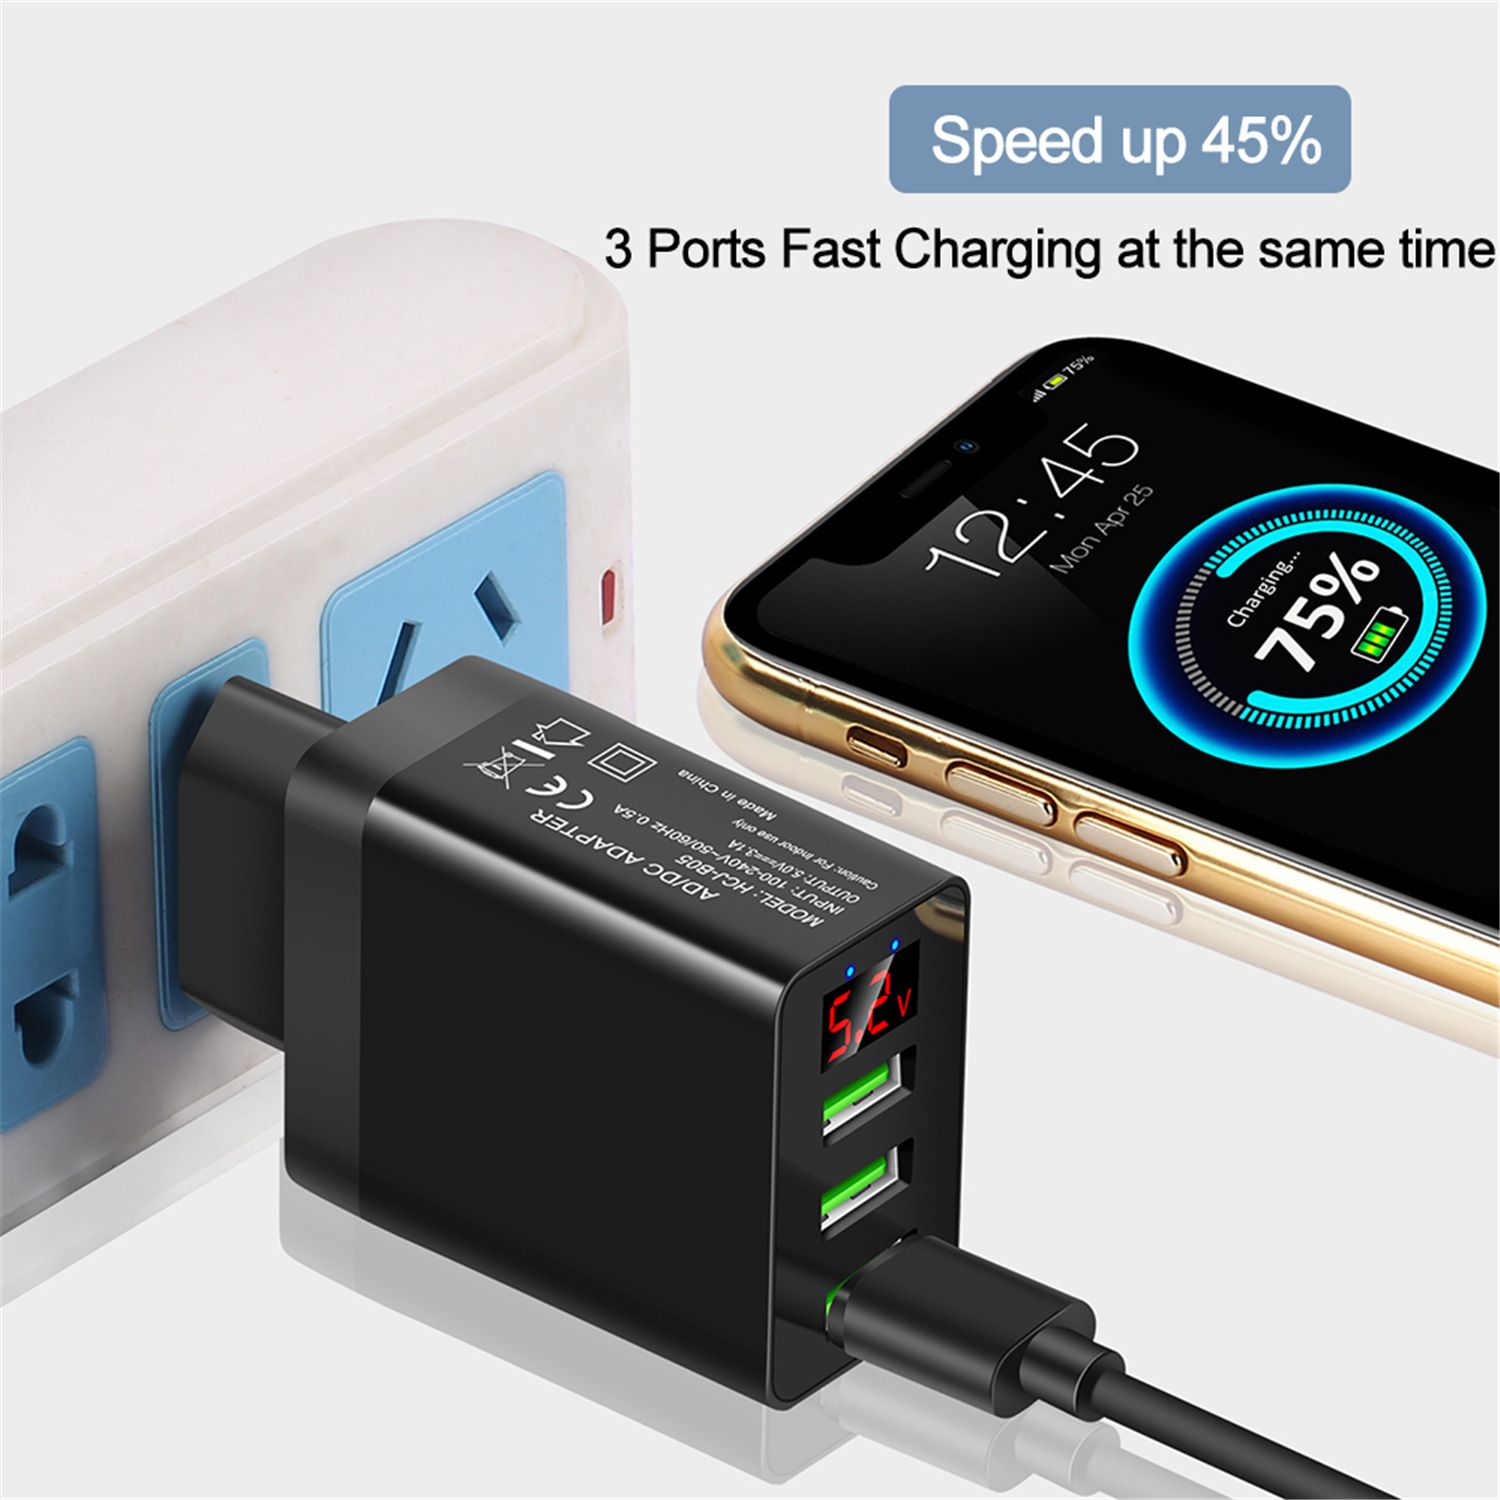 Bakeey-31A-Three-Port-LED-Display-Fast-Charging-USB-Charger-Adapter-For-iPhone-XS-11-Pro-Huawei-P30--1626361